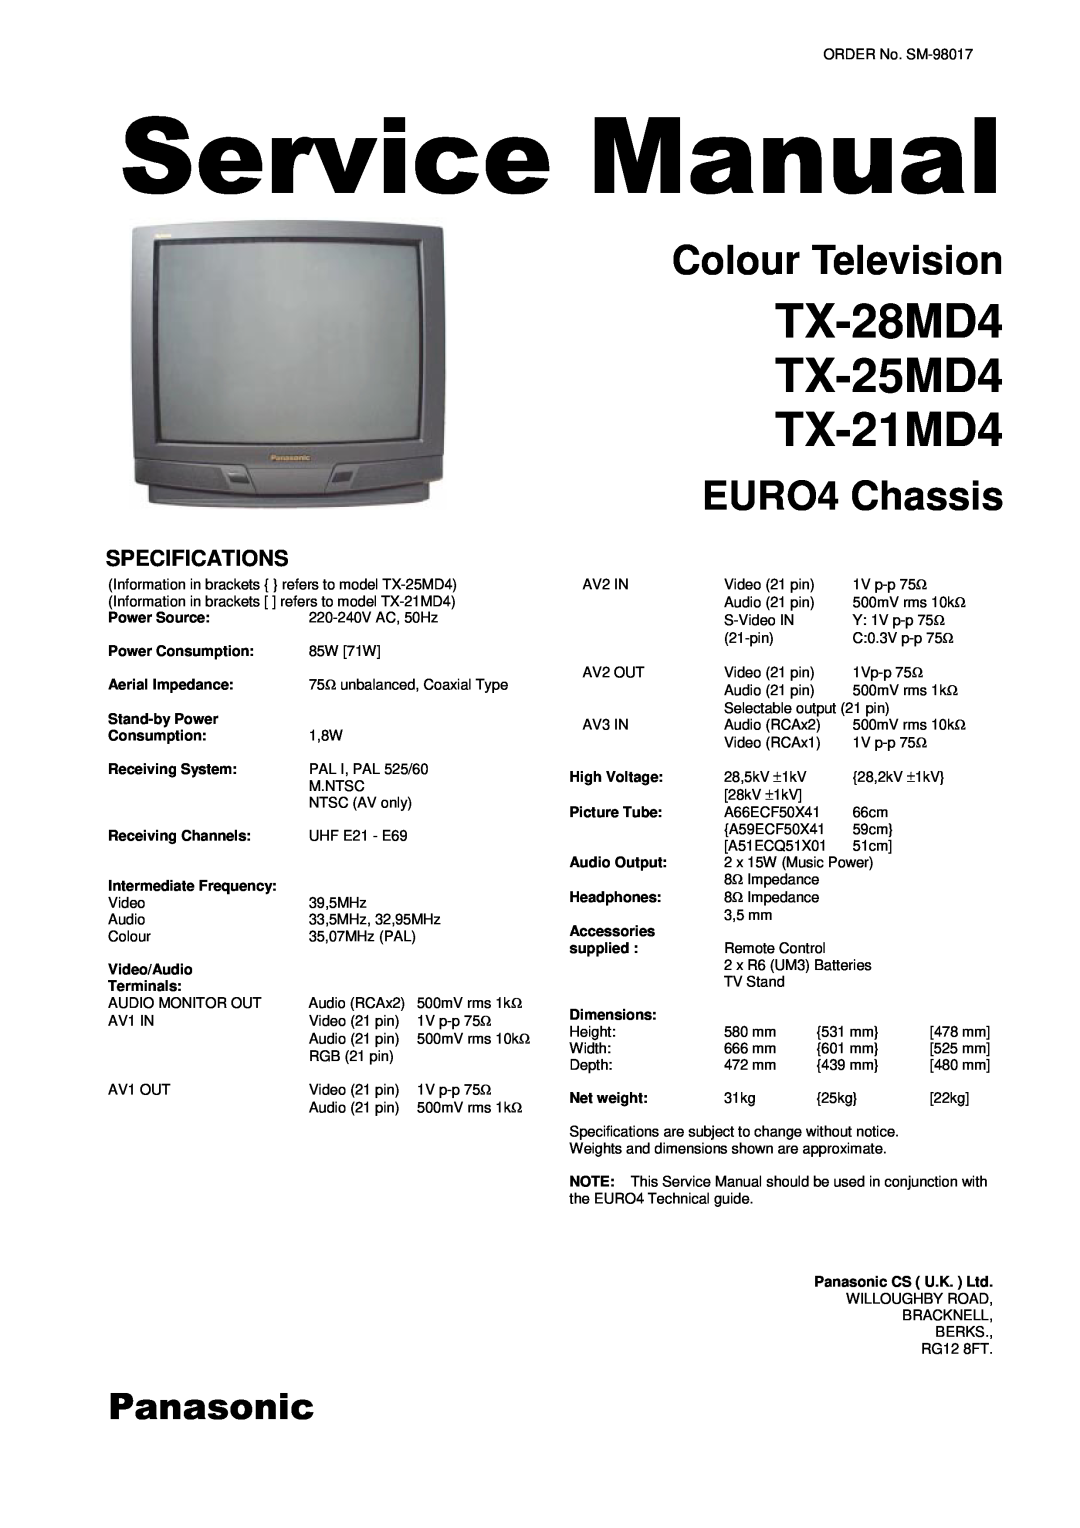 Panasonic specifications TX-28MD4 TX-25MD4 TX-21MD4, Colour Television, EURO4 Chassis, 3DQDVRQLF, Specifications 